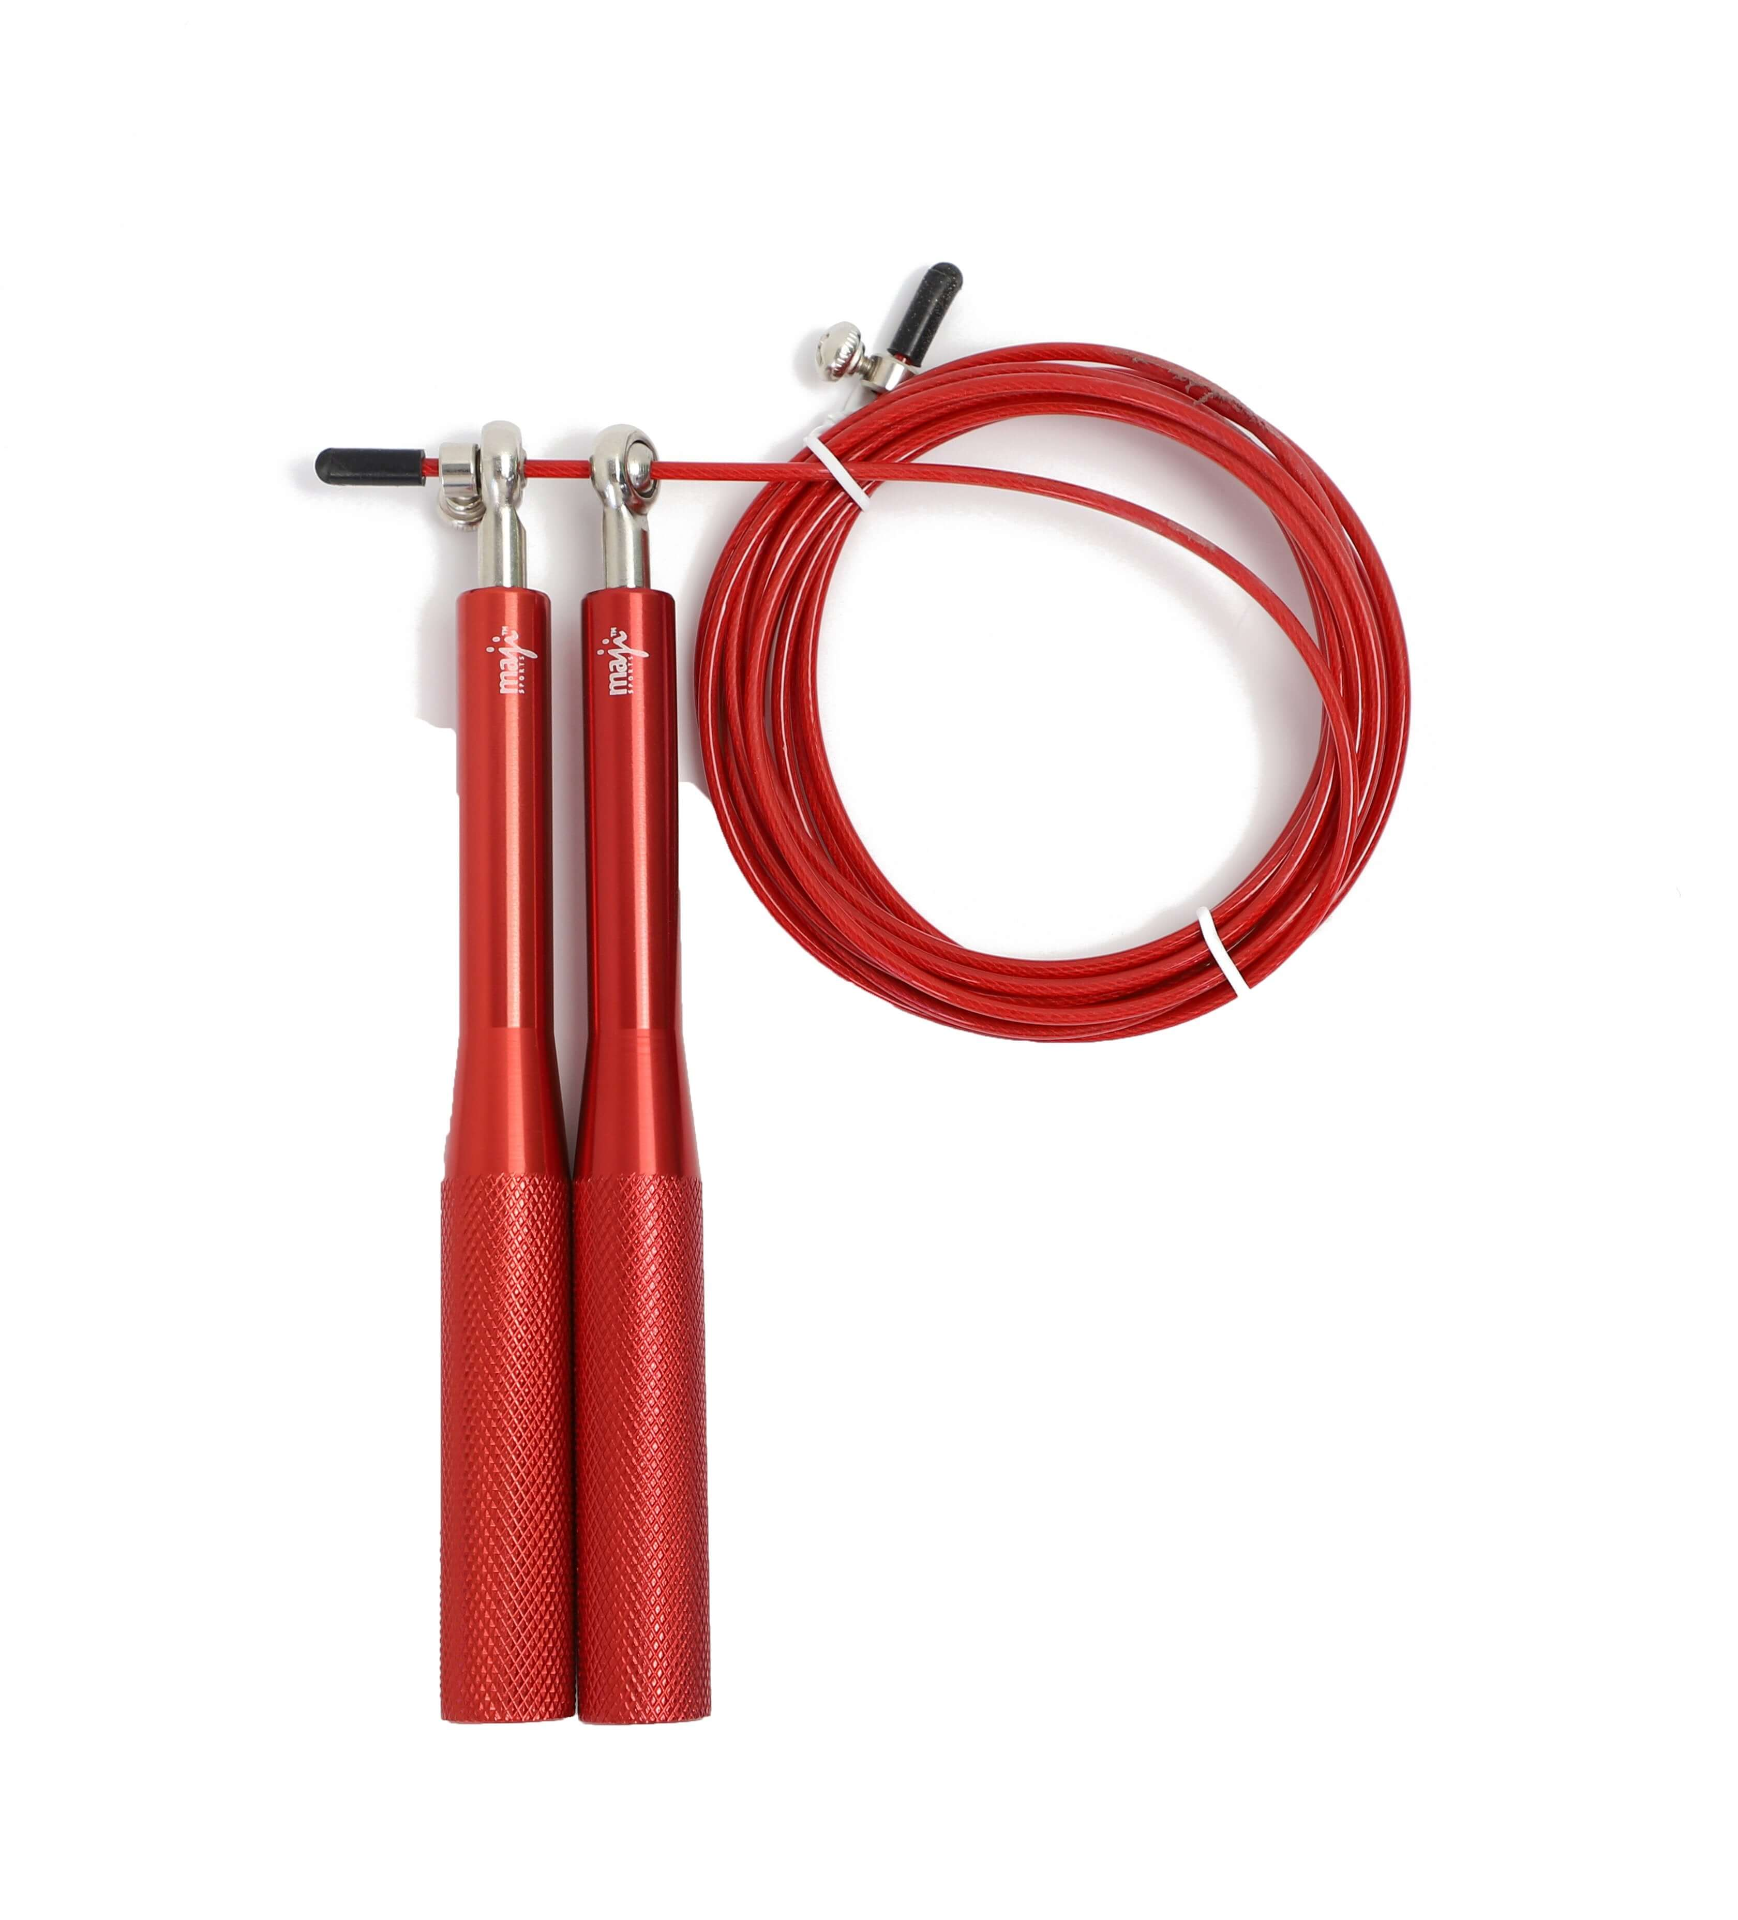 Maji Sports High Speed Jump Rope with Aluminum Handles